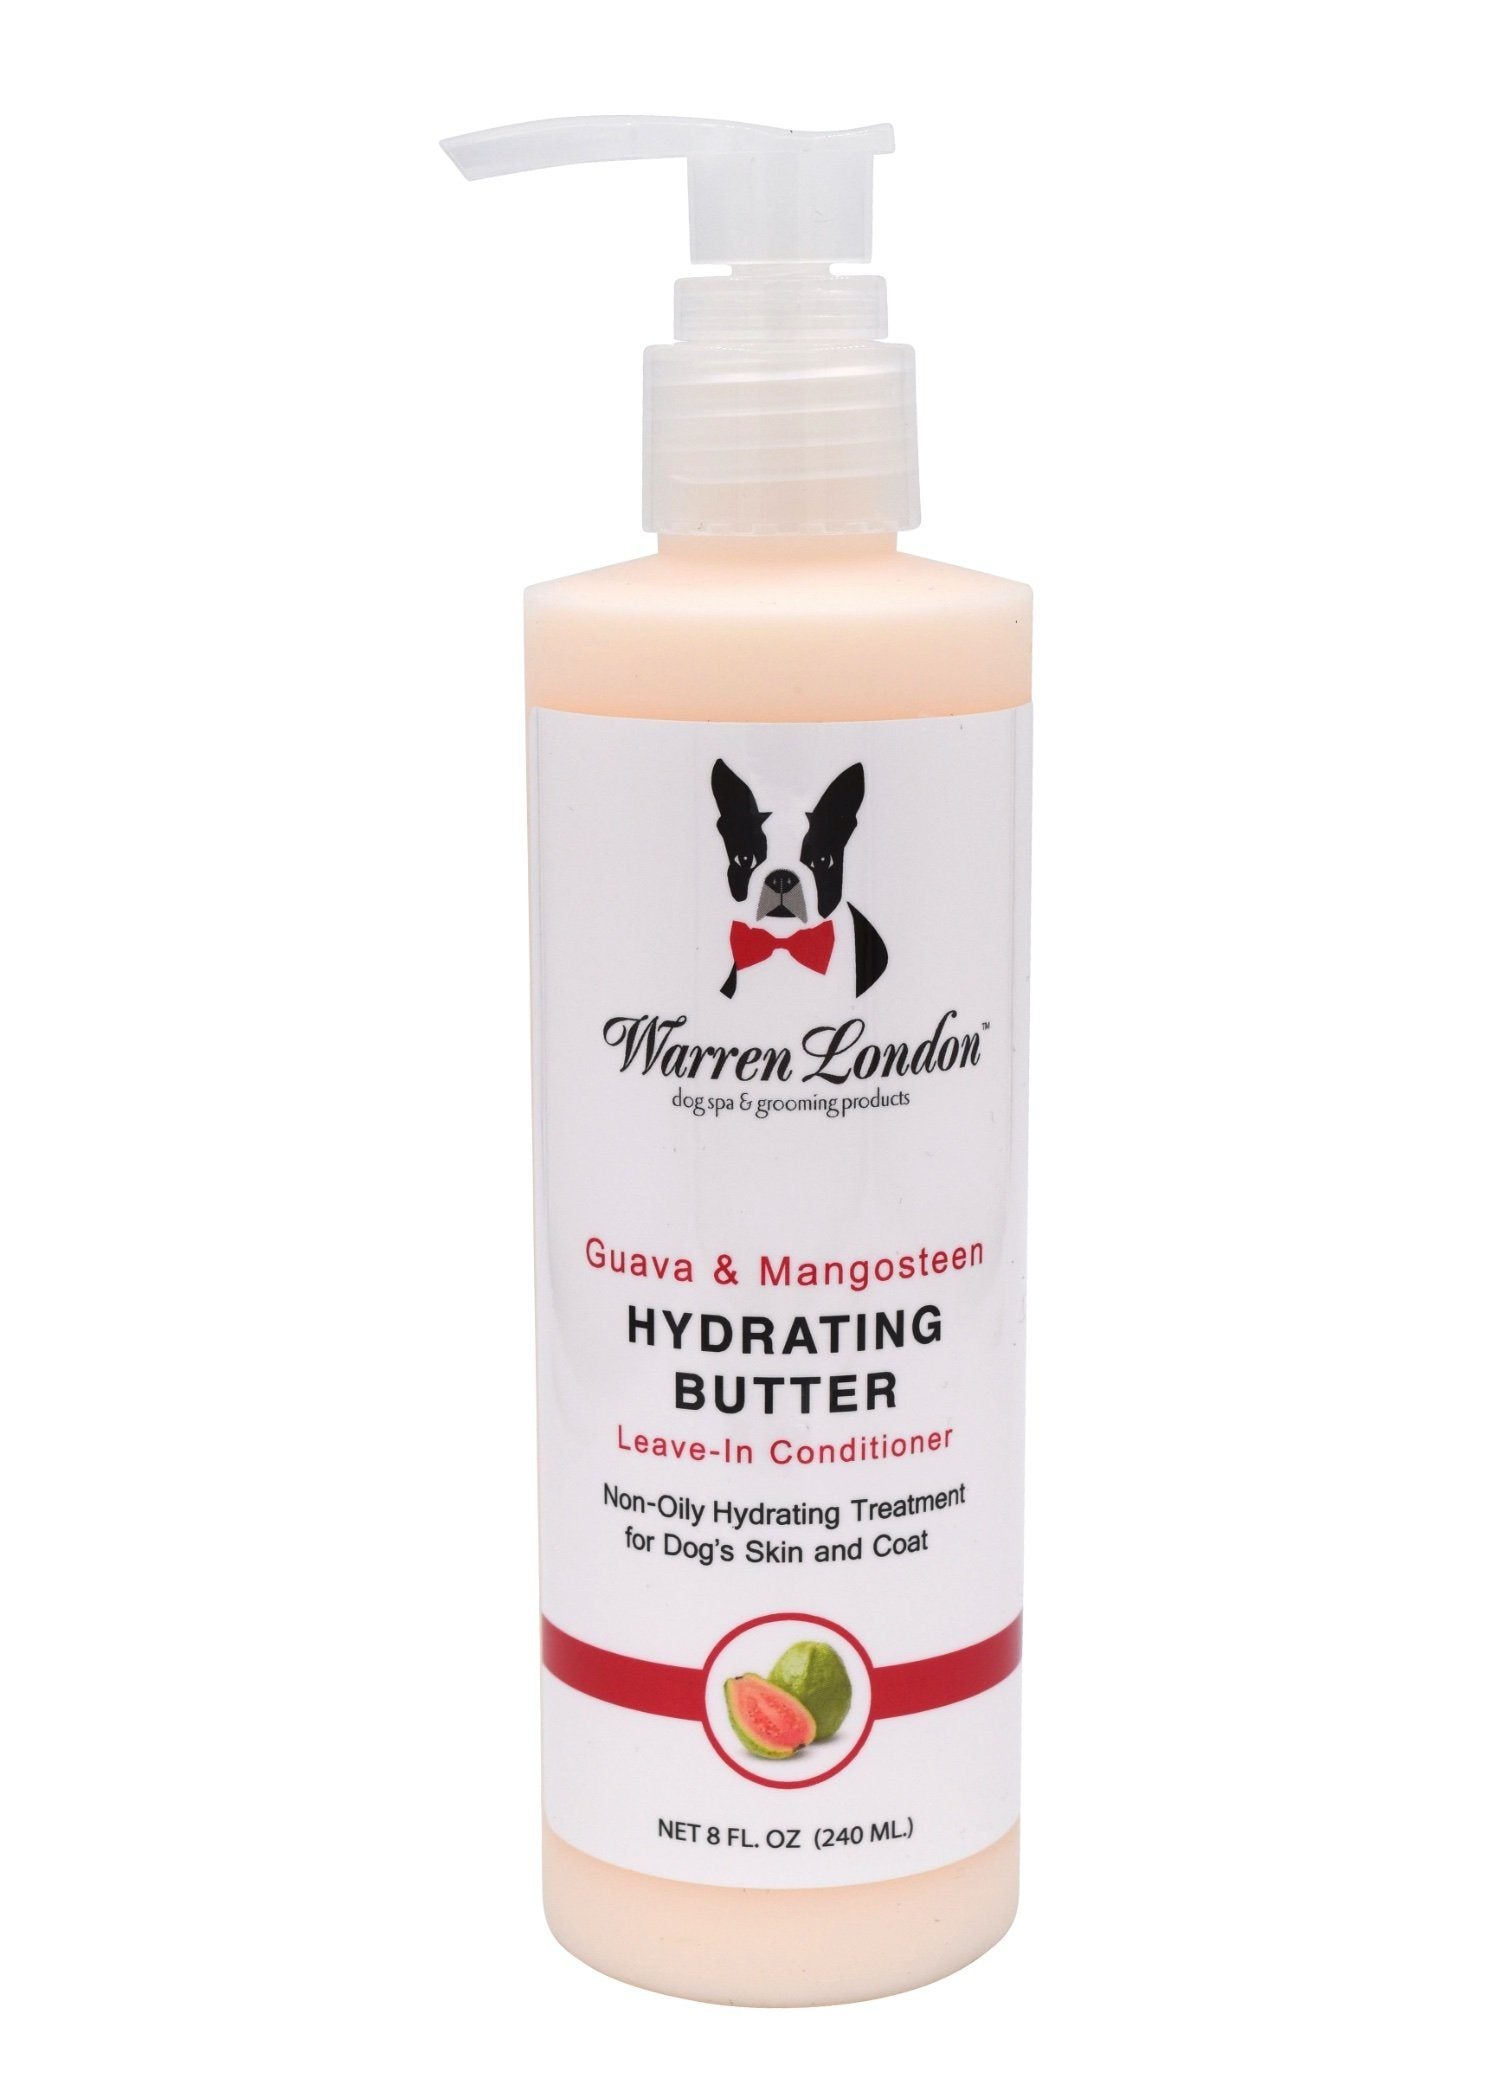 Hydrating Butter - For Dog's Skin & Coat - Leave-In Moisturizer Spa Product Warren London Guava & Mango 